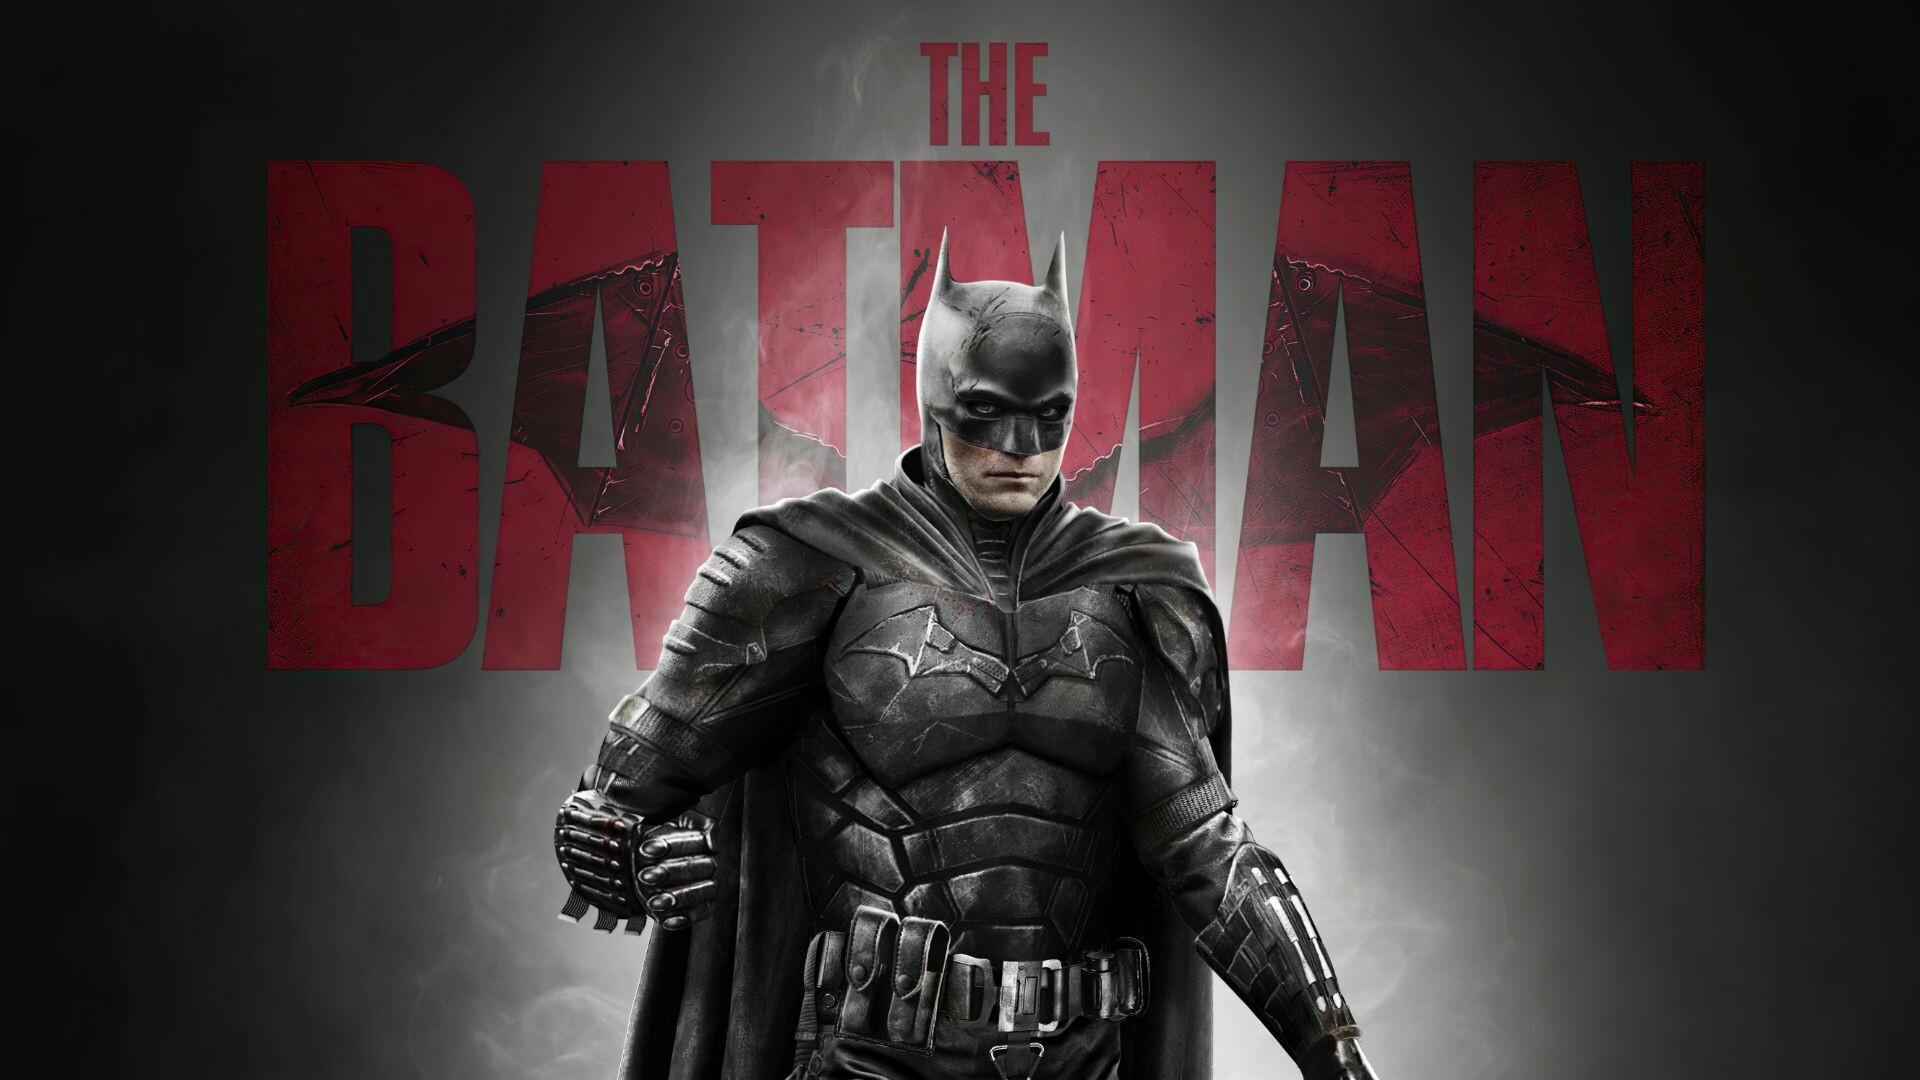 The Batman (2022): The second-longest comic book movie theatrically released. 1920x1080 Full HD Wallpaper.